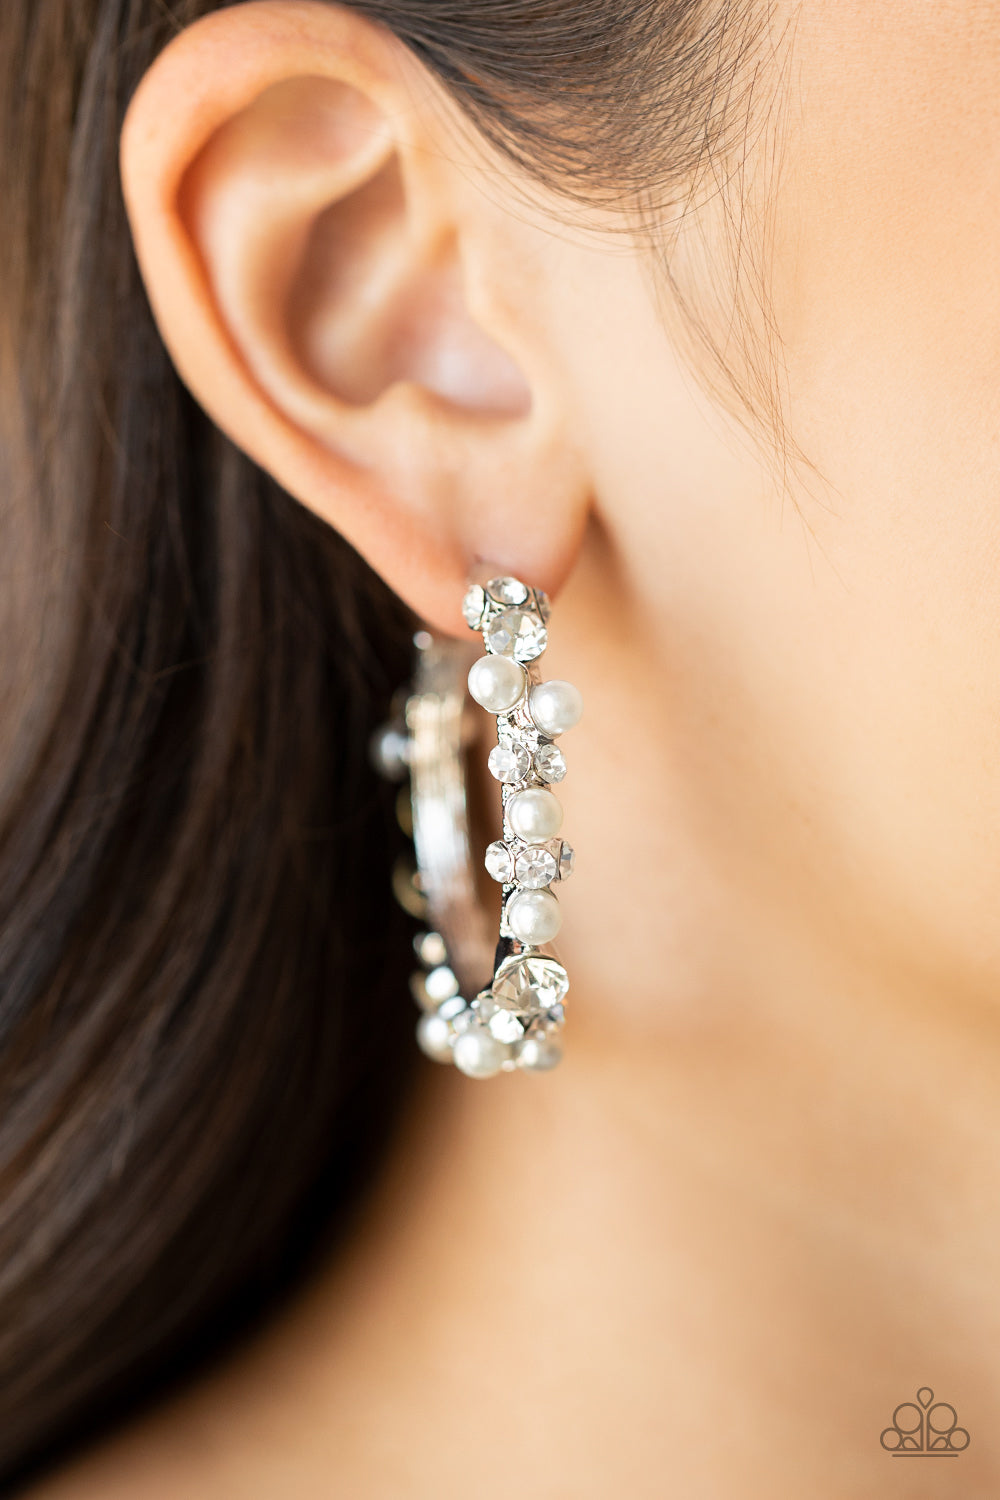 Paparazzi Earrings ~ Let There Be SOCIALITE - White